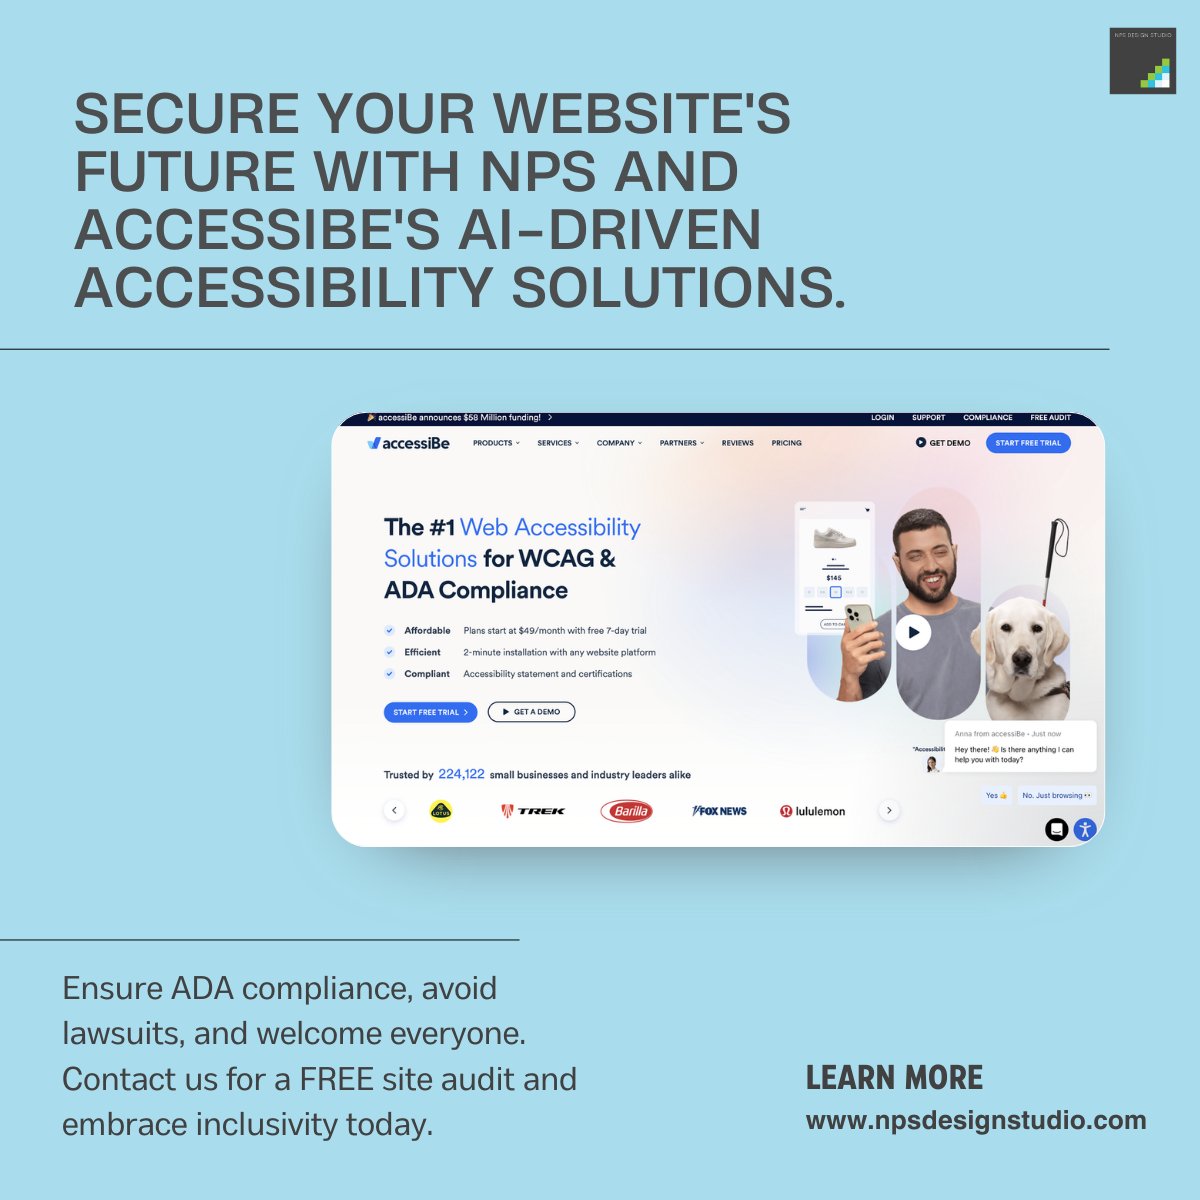 Secure your website's future with NPS and accessiBe's AI-driven accessibility solutions. Ensure ADA compliance, avoid lawsuits, and welcome everyone. Contact us for a FREE site audit and embrace inclusivity today. #WebAccessibility #ADACompliance #NPSDesignStudio